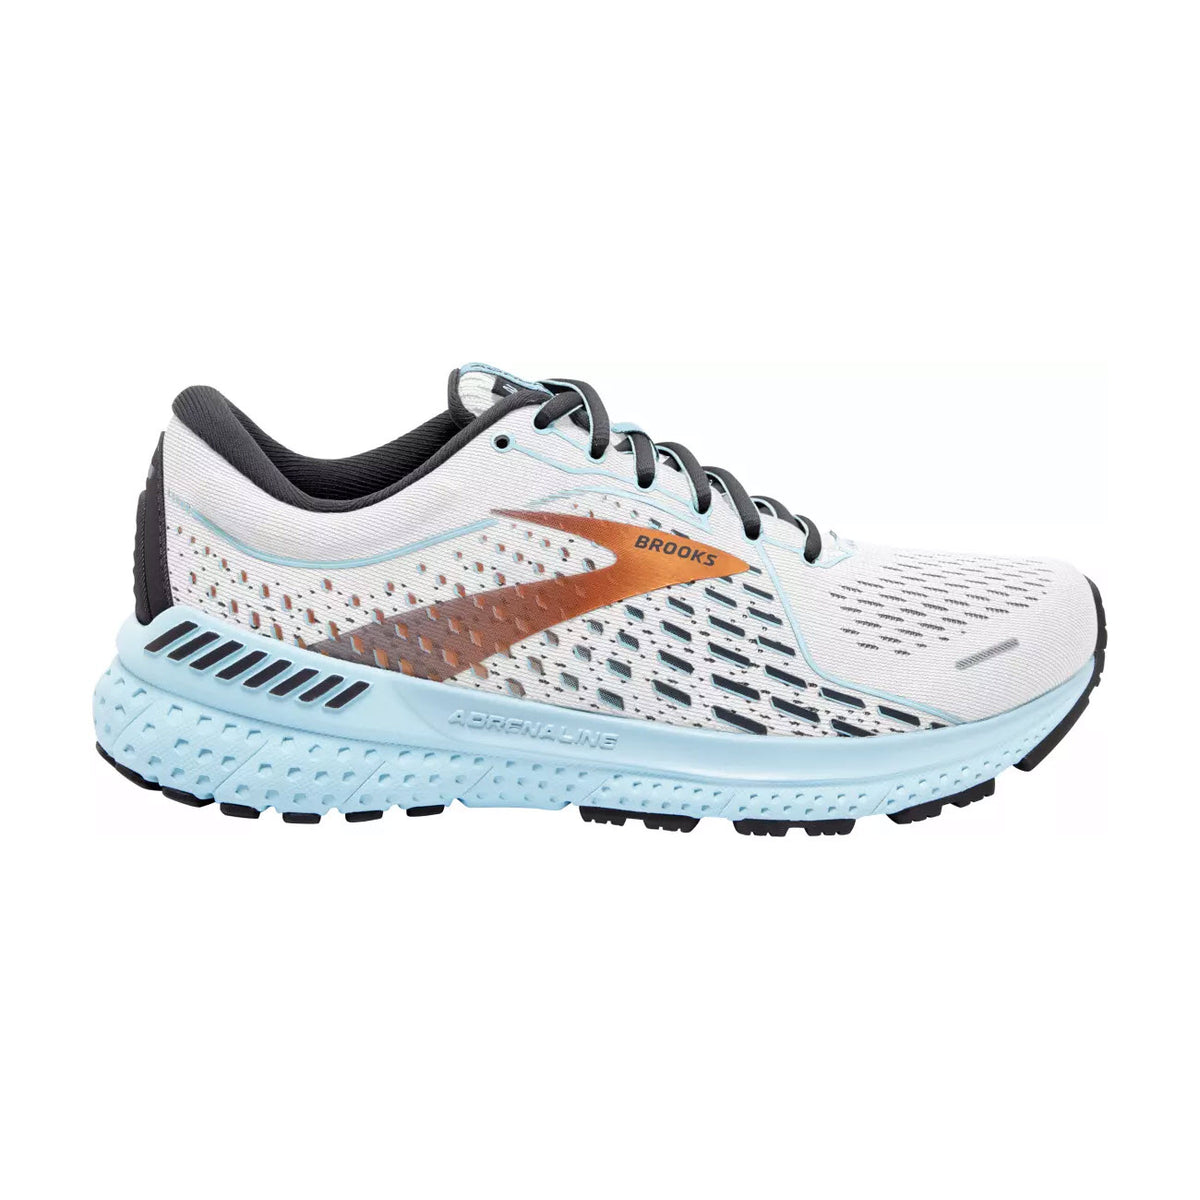 White and blue Brooks Adrenaline GTS 21 running shoe with orange accents and GuideRails Holistic Support System on a white background.